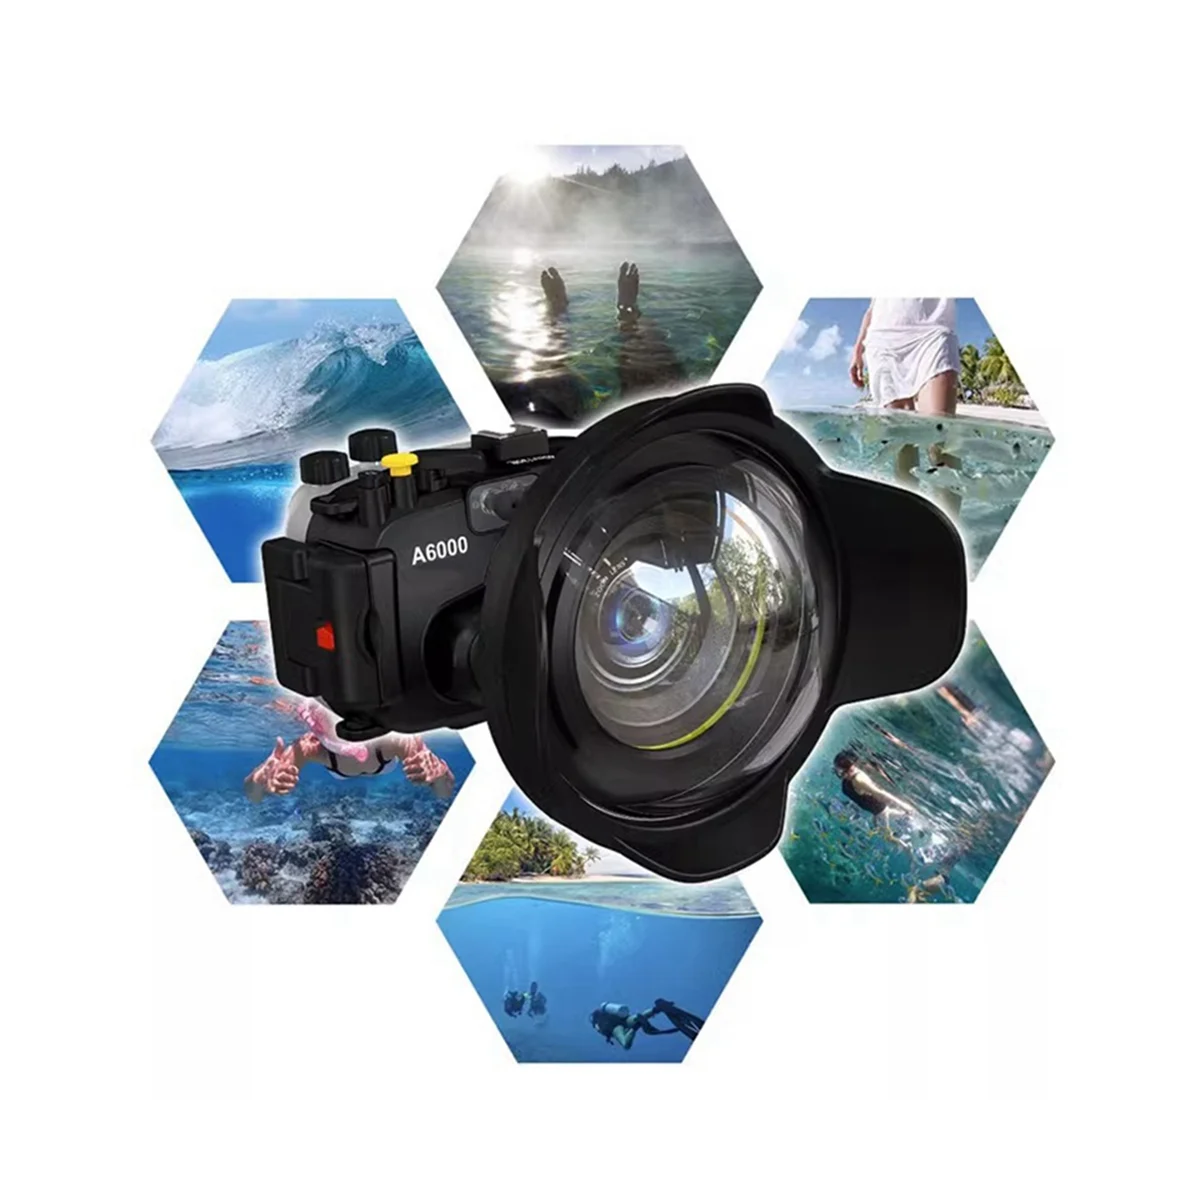 

For SLR Camera 67mm Portable Waterproof Wide Angle Dome Port Lens Housing Case Underwater Diving Parts,20.8x19x8.3cm